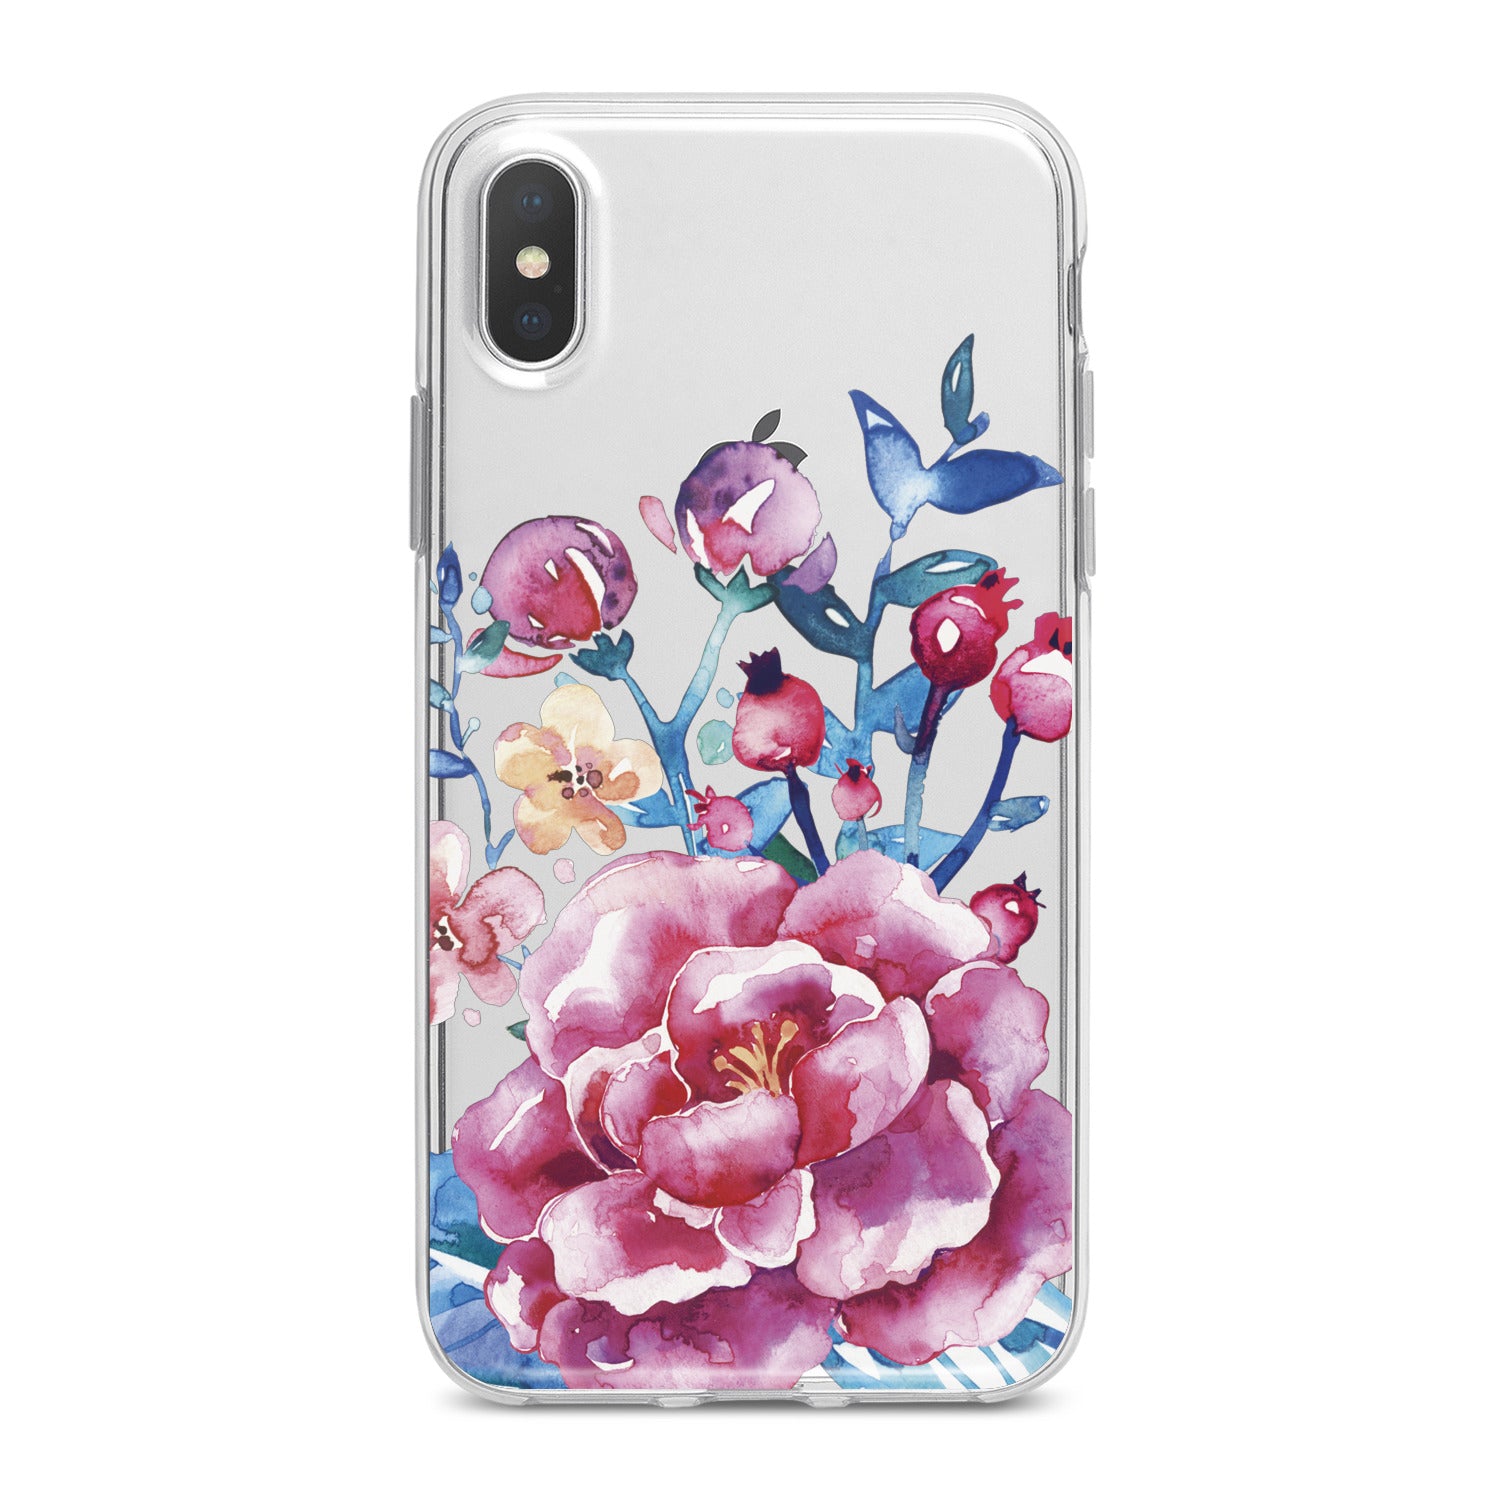 Lex Altern Bright Pink Peonies Phone Case for your iPhone & Android phone.